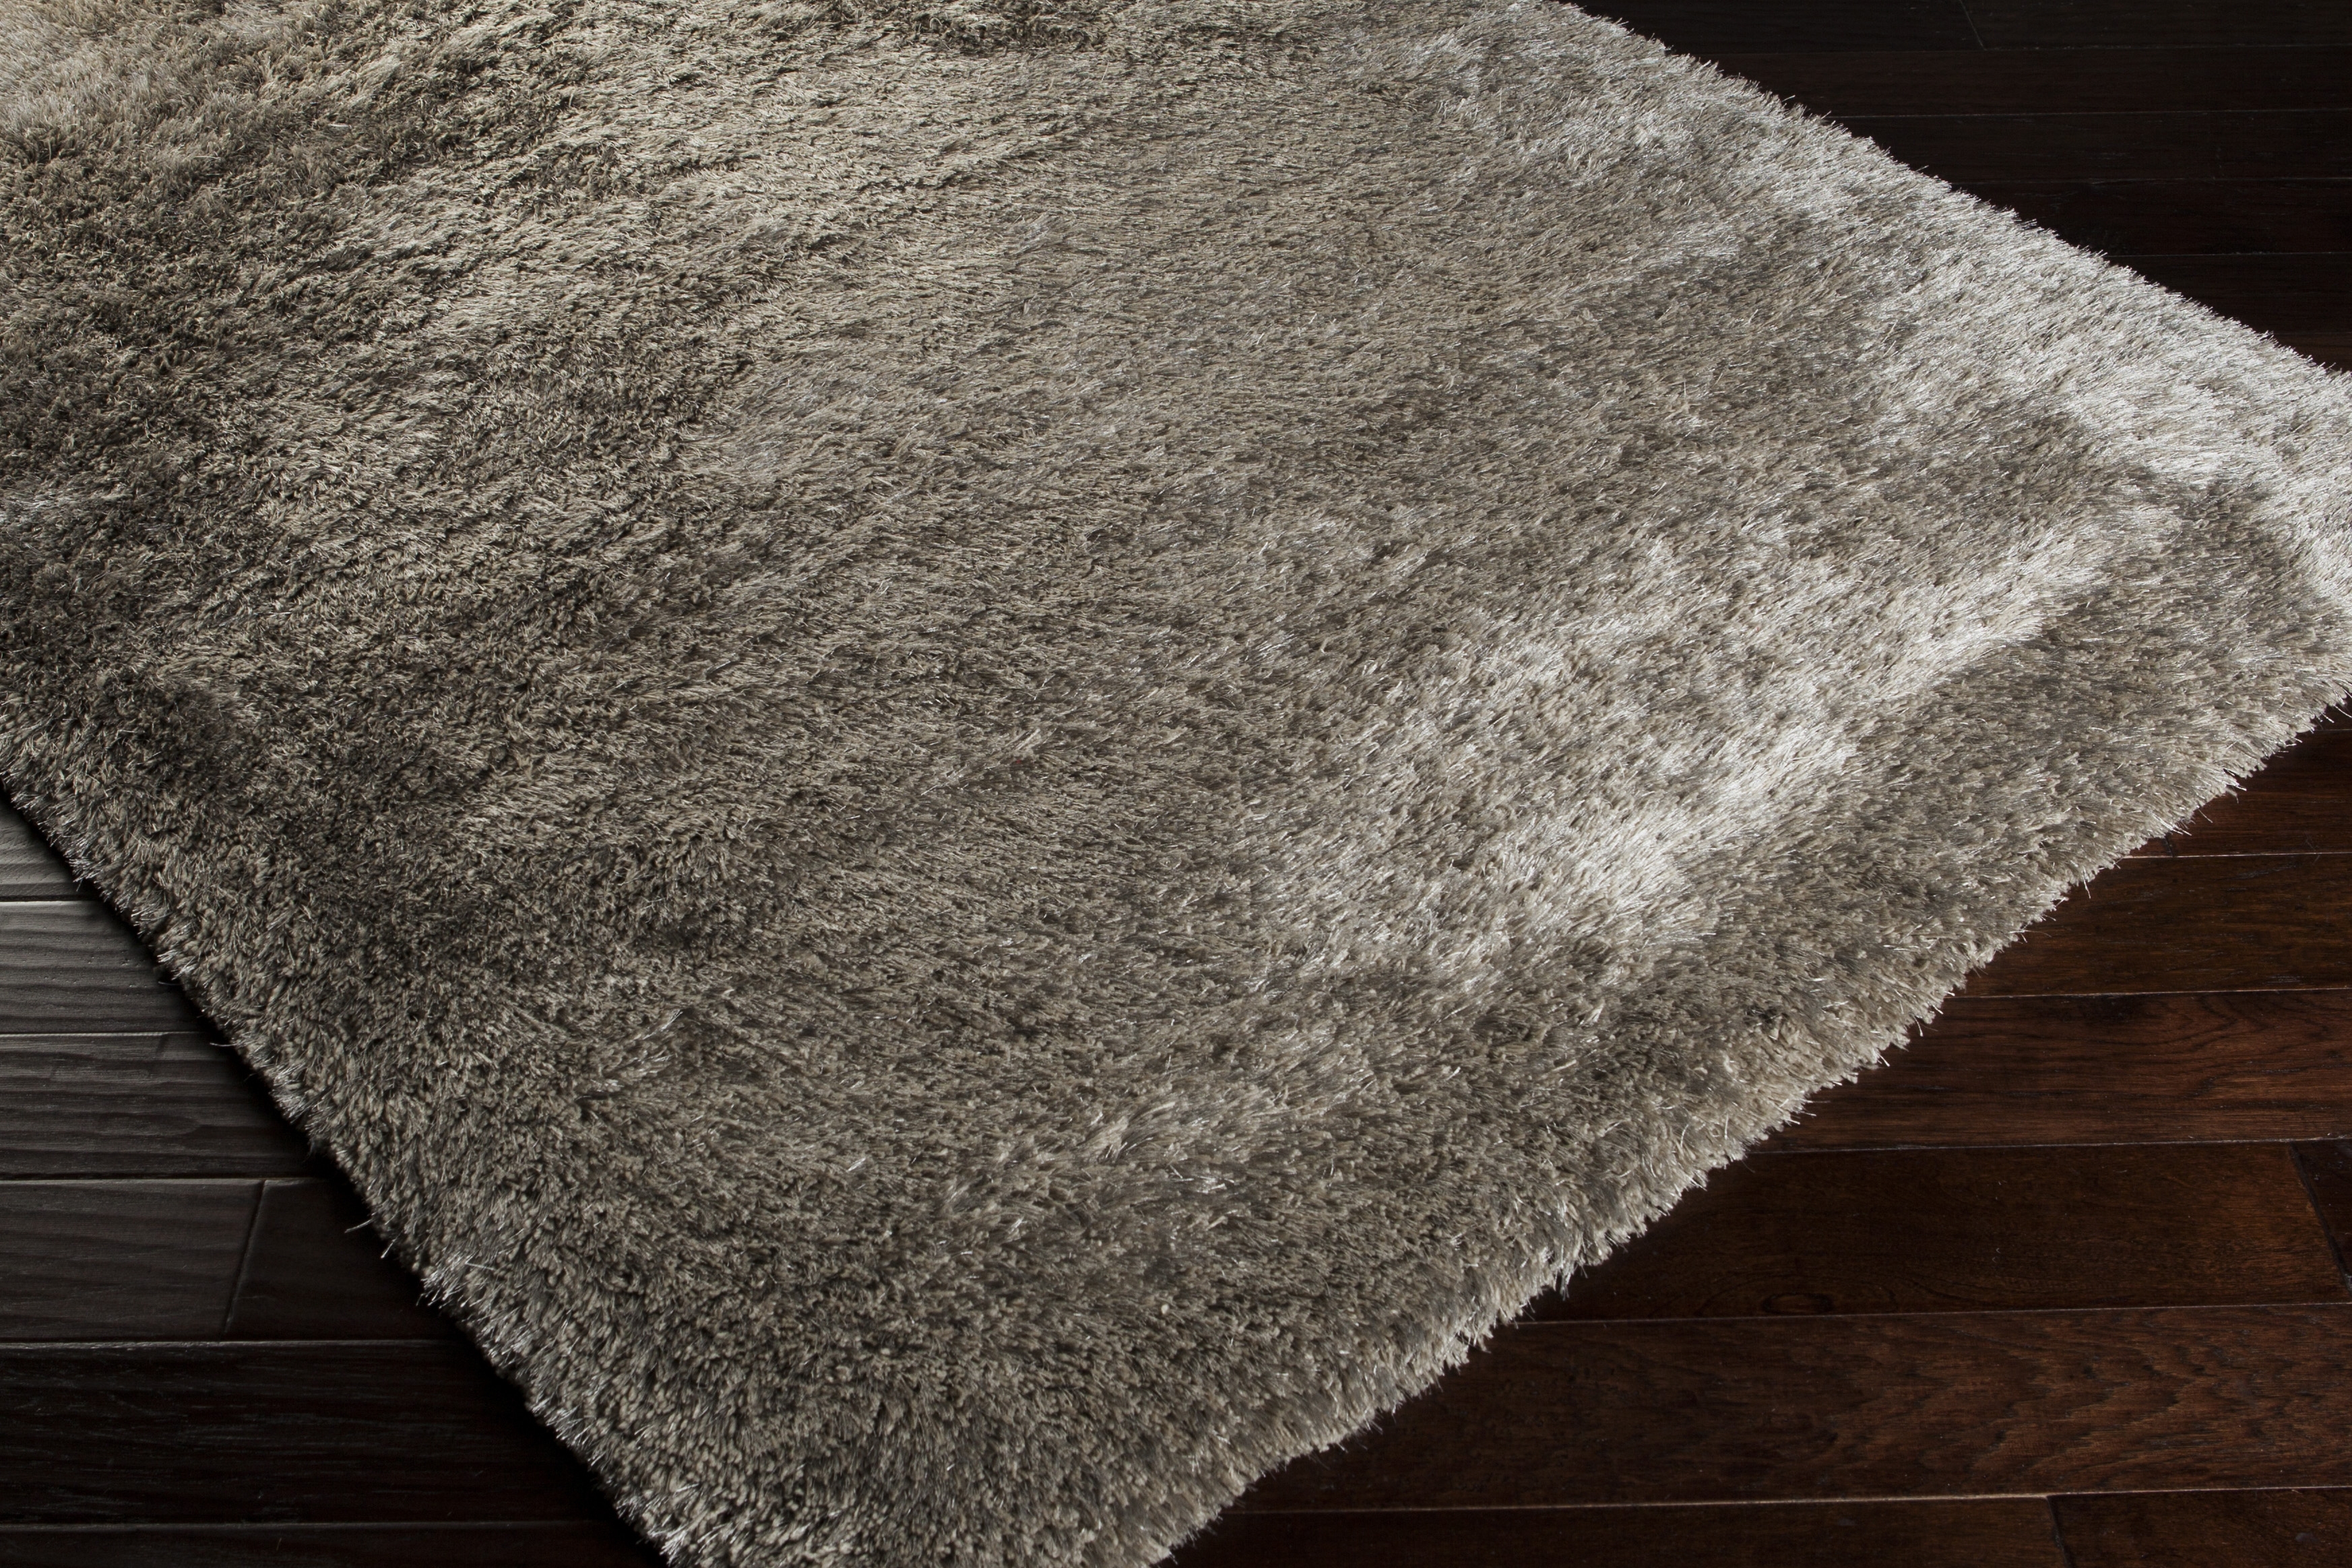 Grizzly Rug, 9' x 12' - Image 3